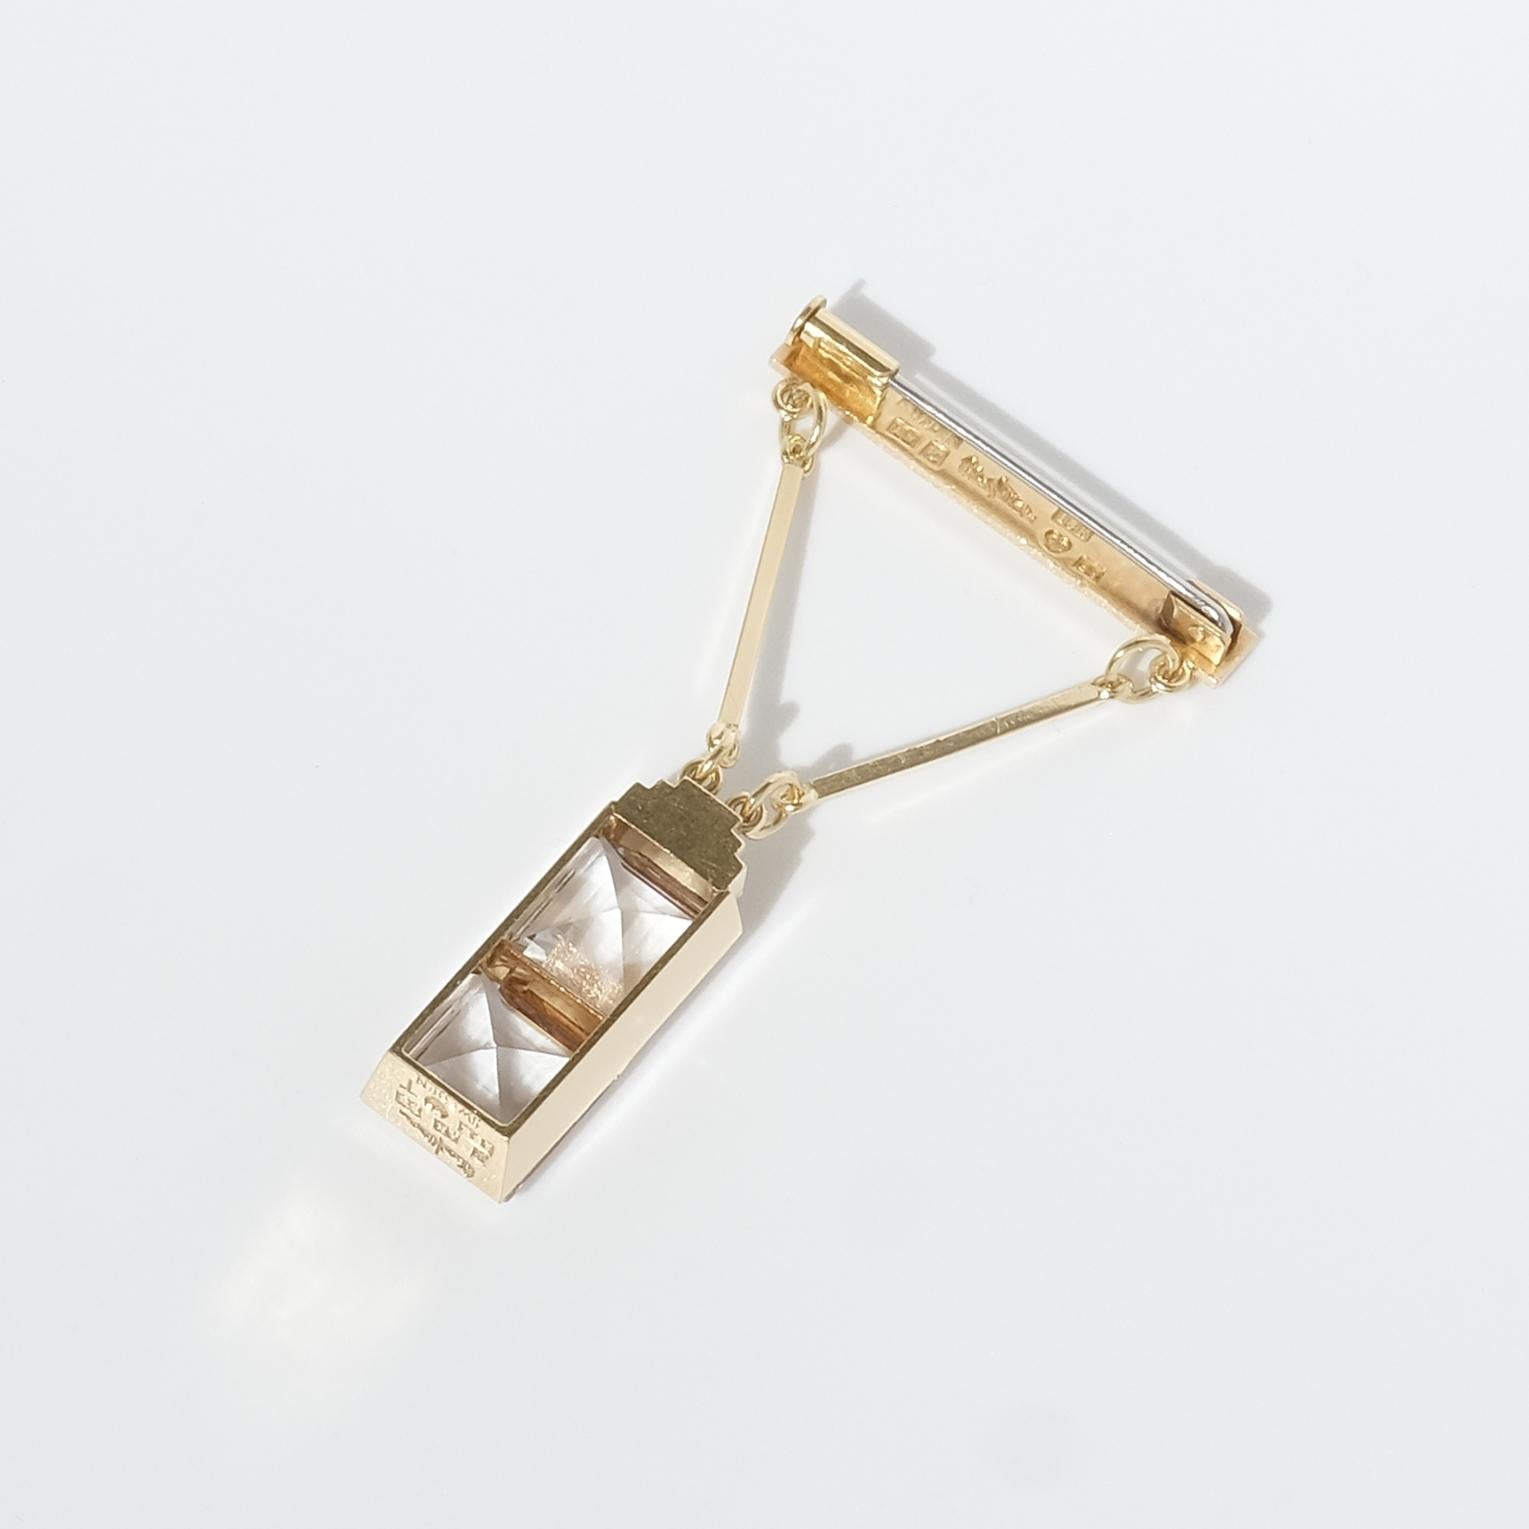 This 18 karat gold Art Deco style brooch has a partly stair shaped pendant which is holding two square faceted cut rock crystals. The geometric lines, the clean-cuts, the modern design and the square faceted cut rock crystals of this brooch can be